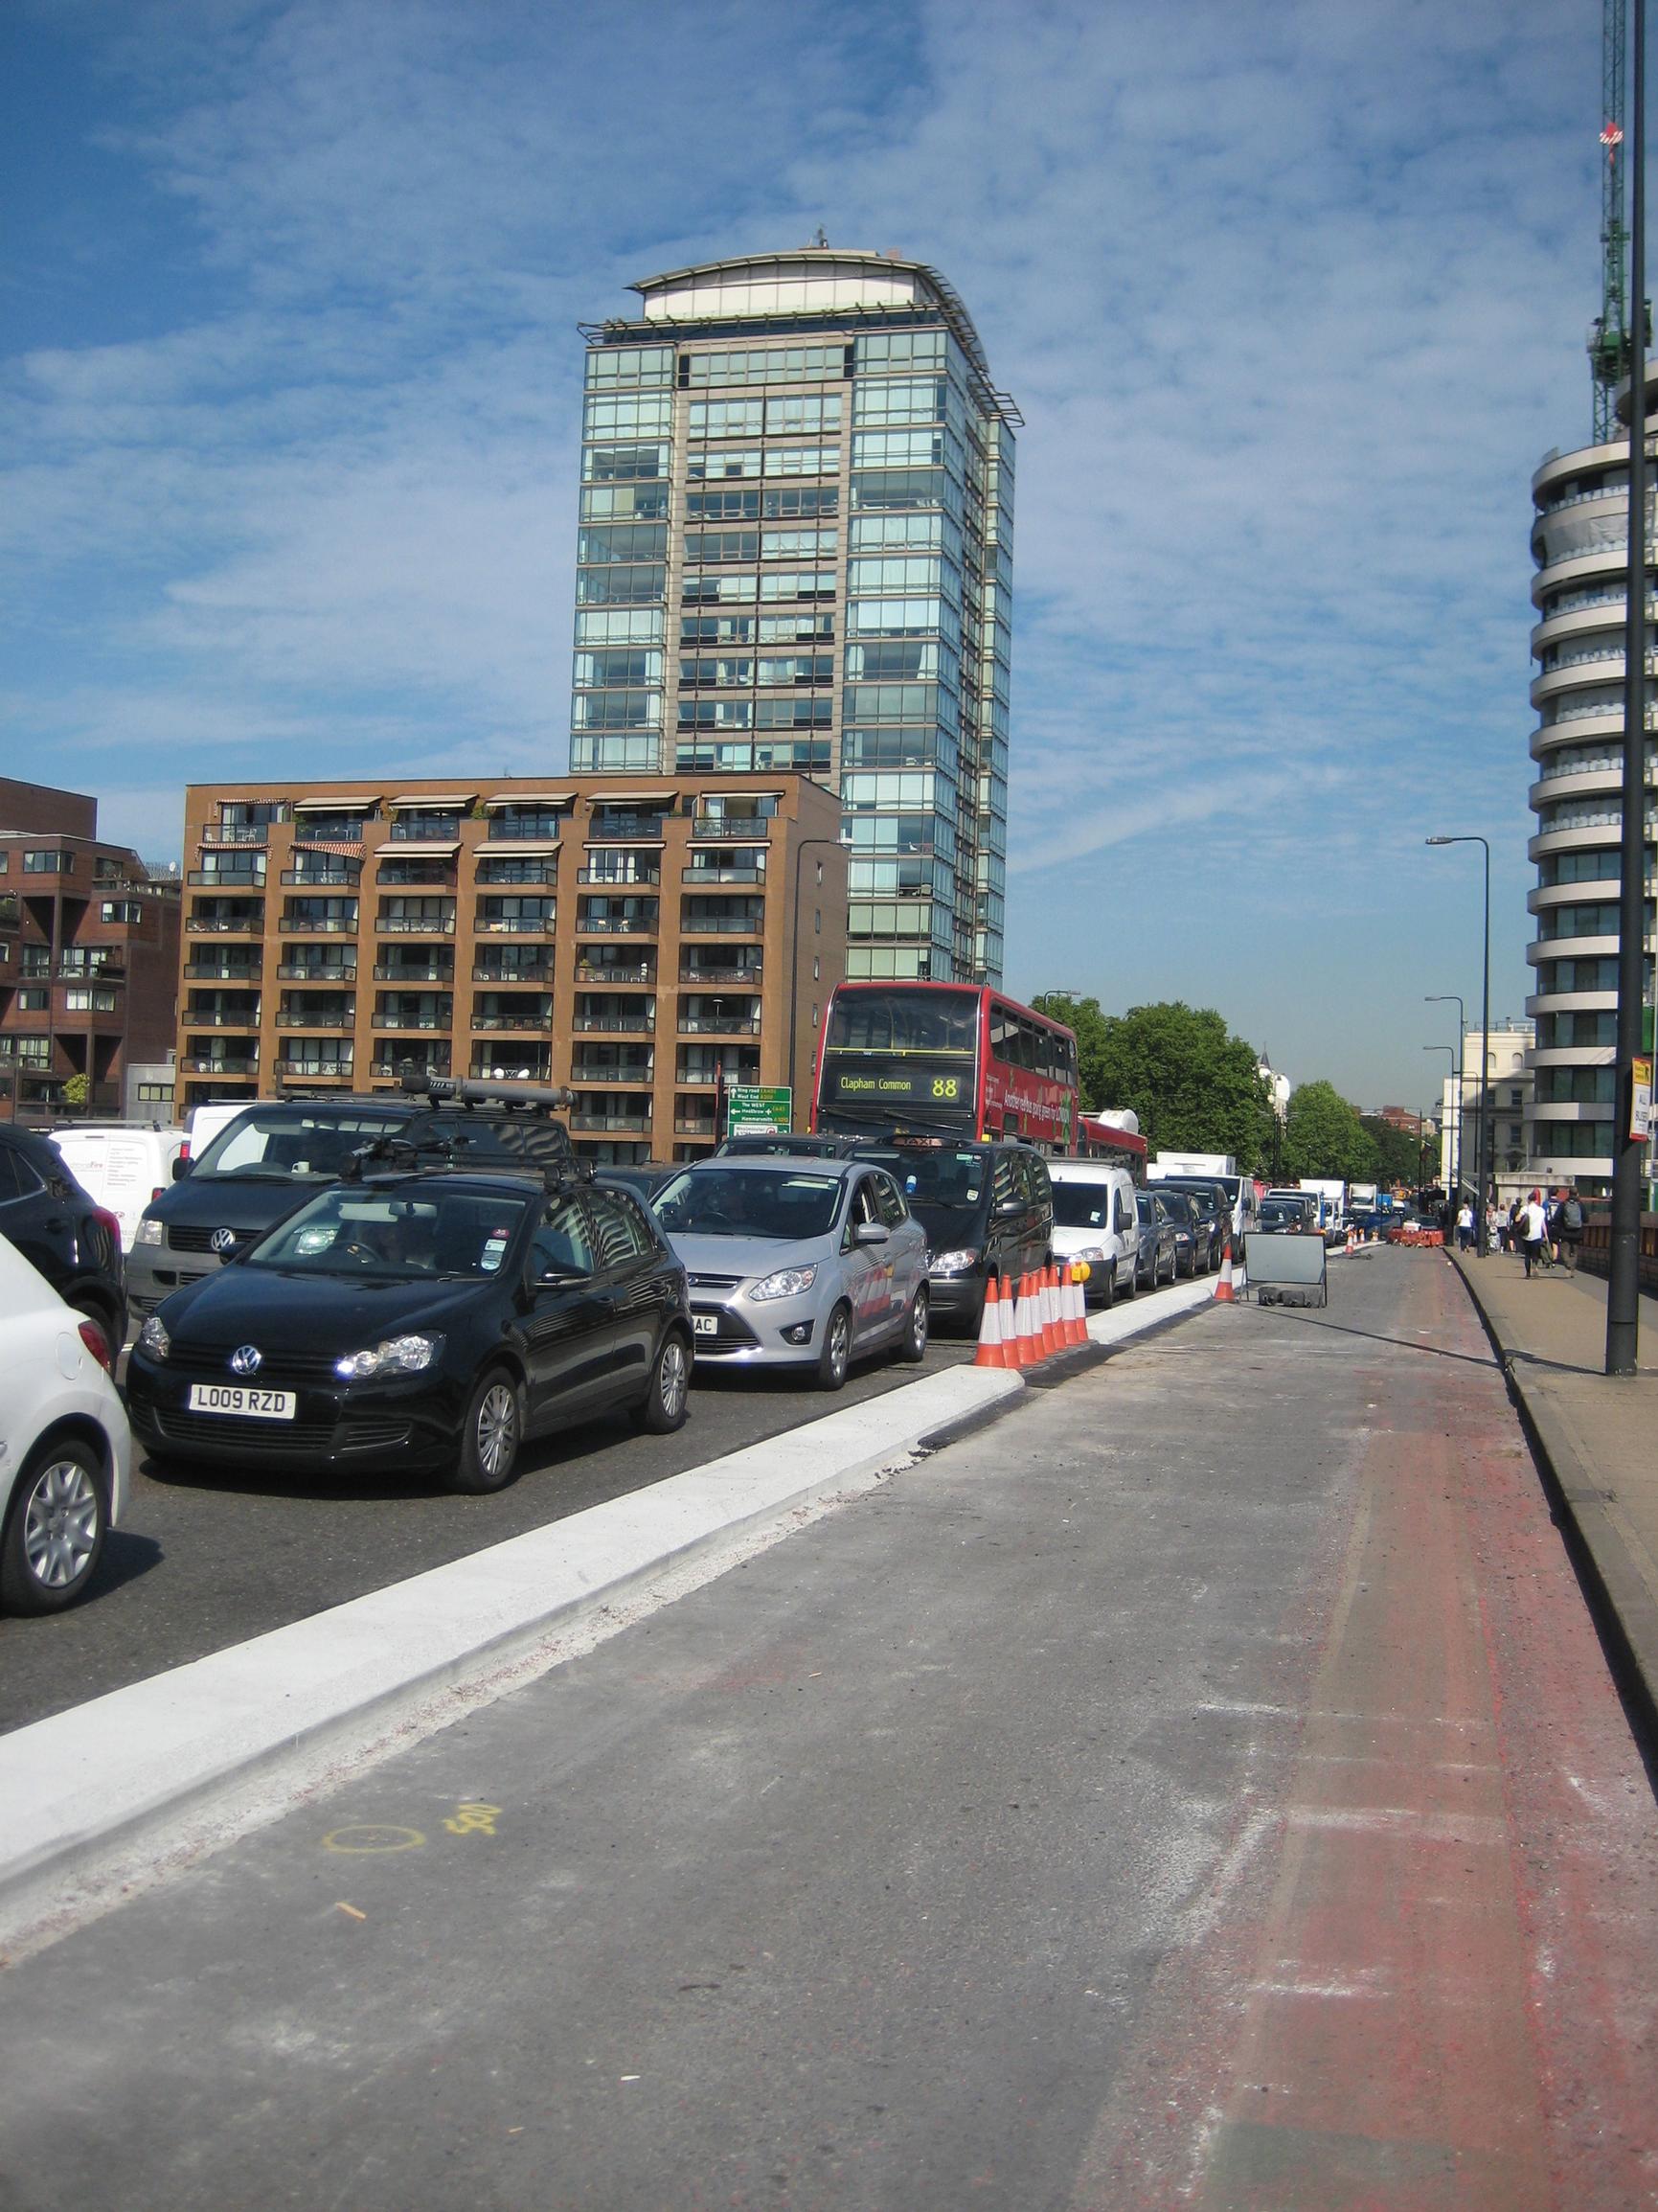 Congestion on Vauxhall bridge during construction of a cycle superhighway last summer